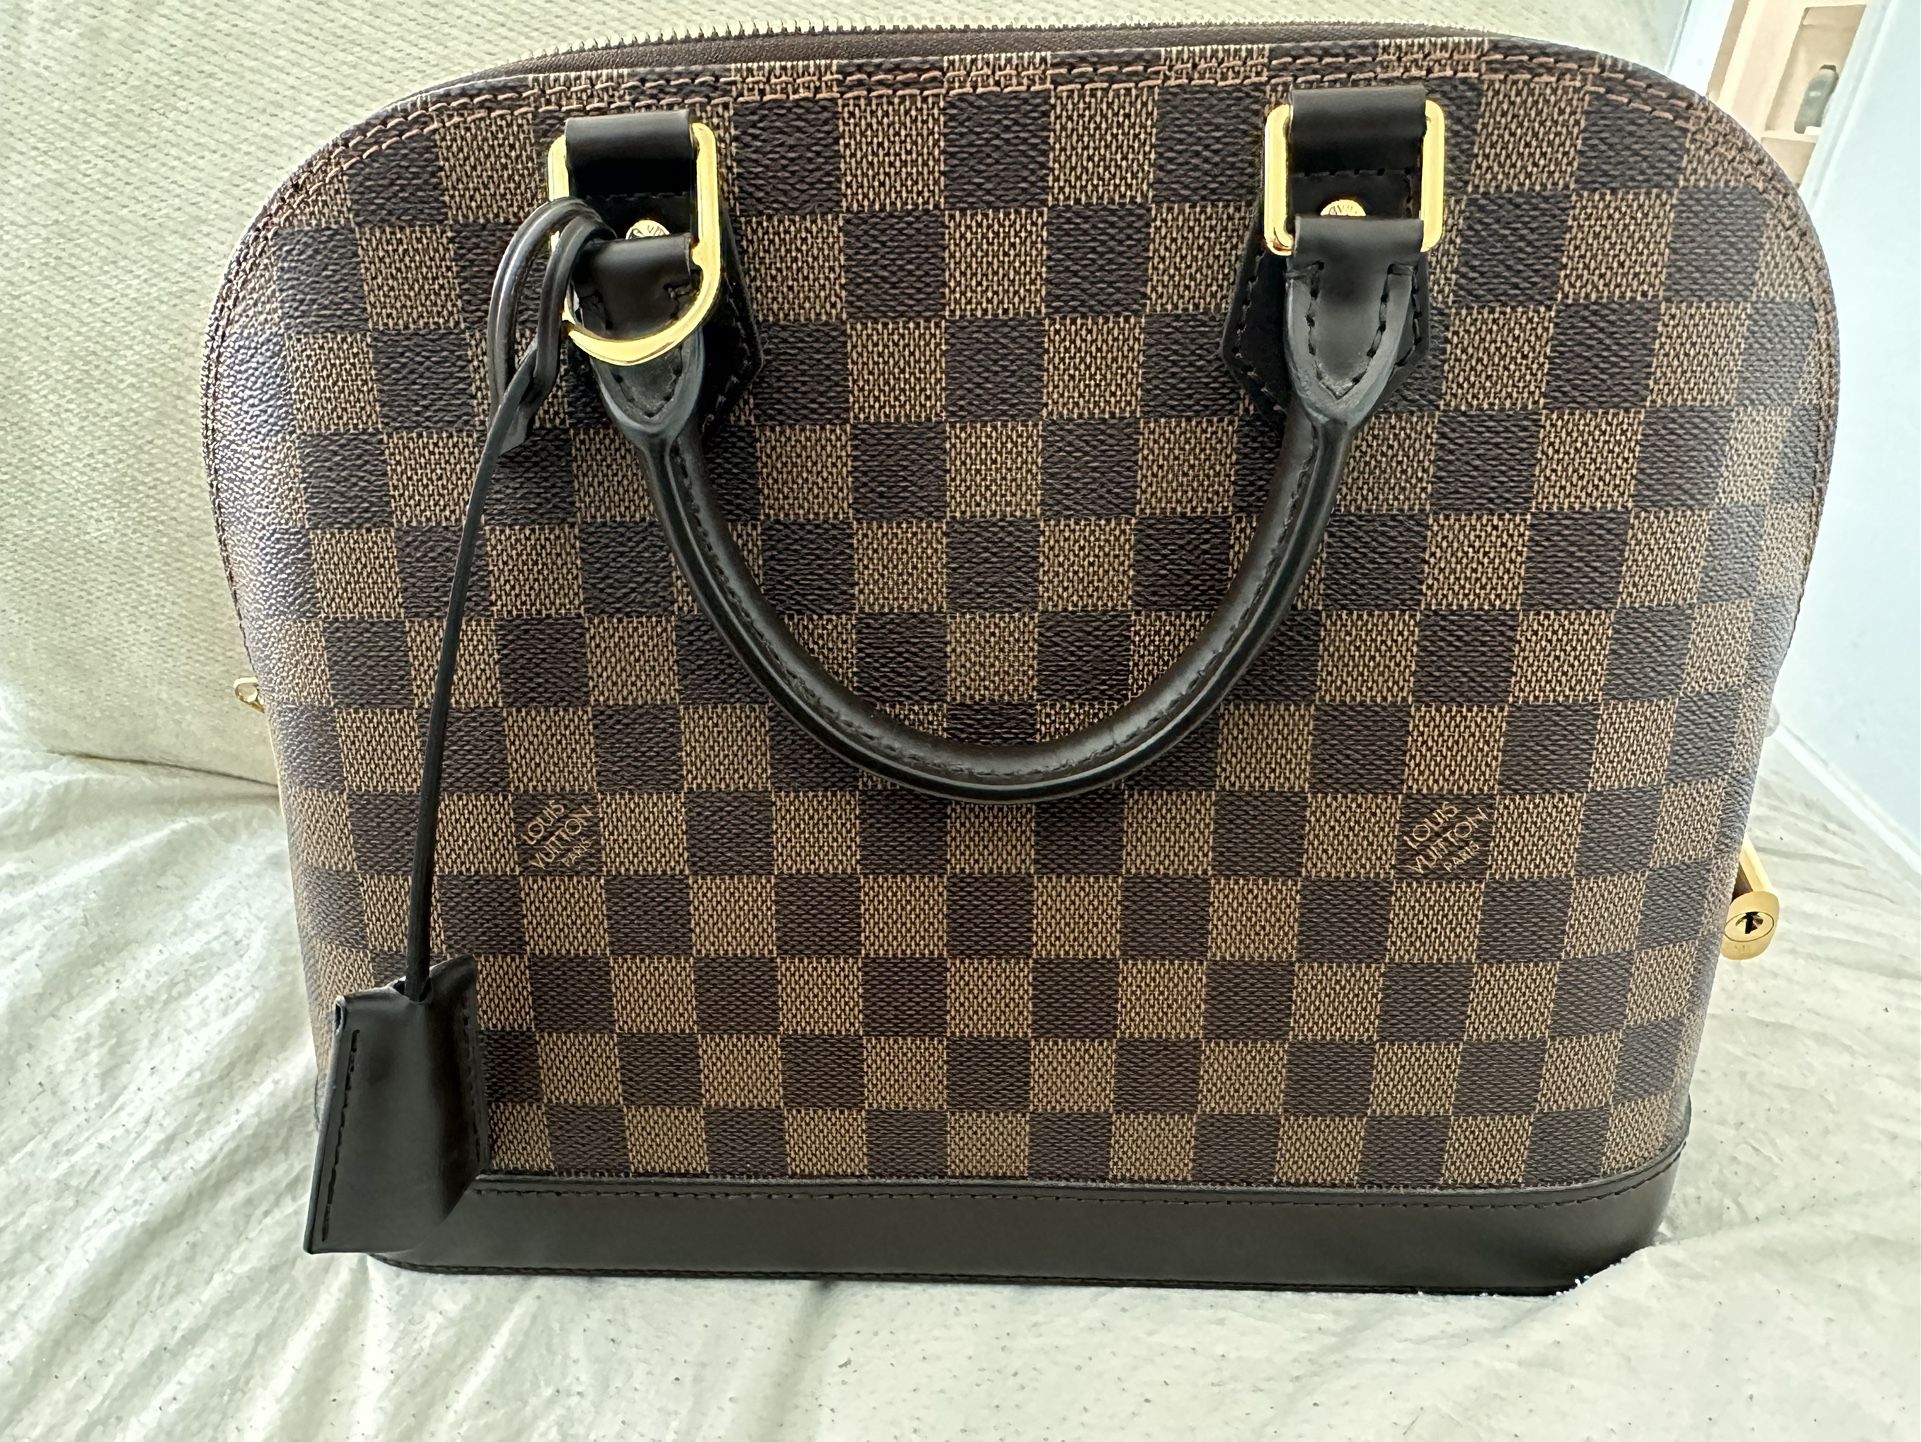 2021 Louis Vuitton Alma PM - clothing & accessories - by owner